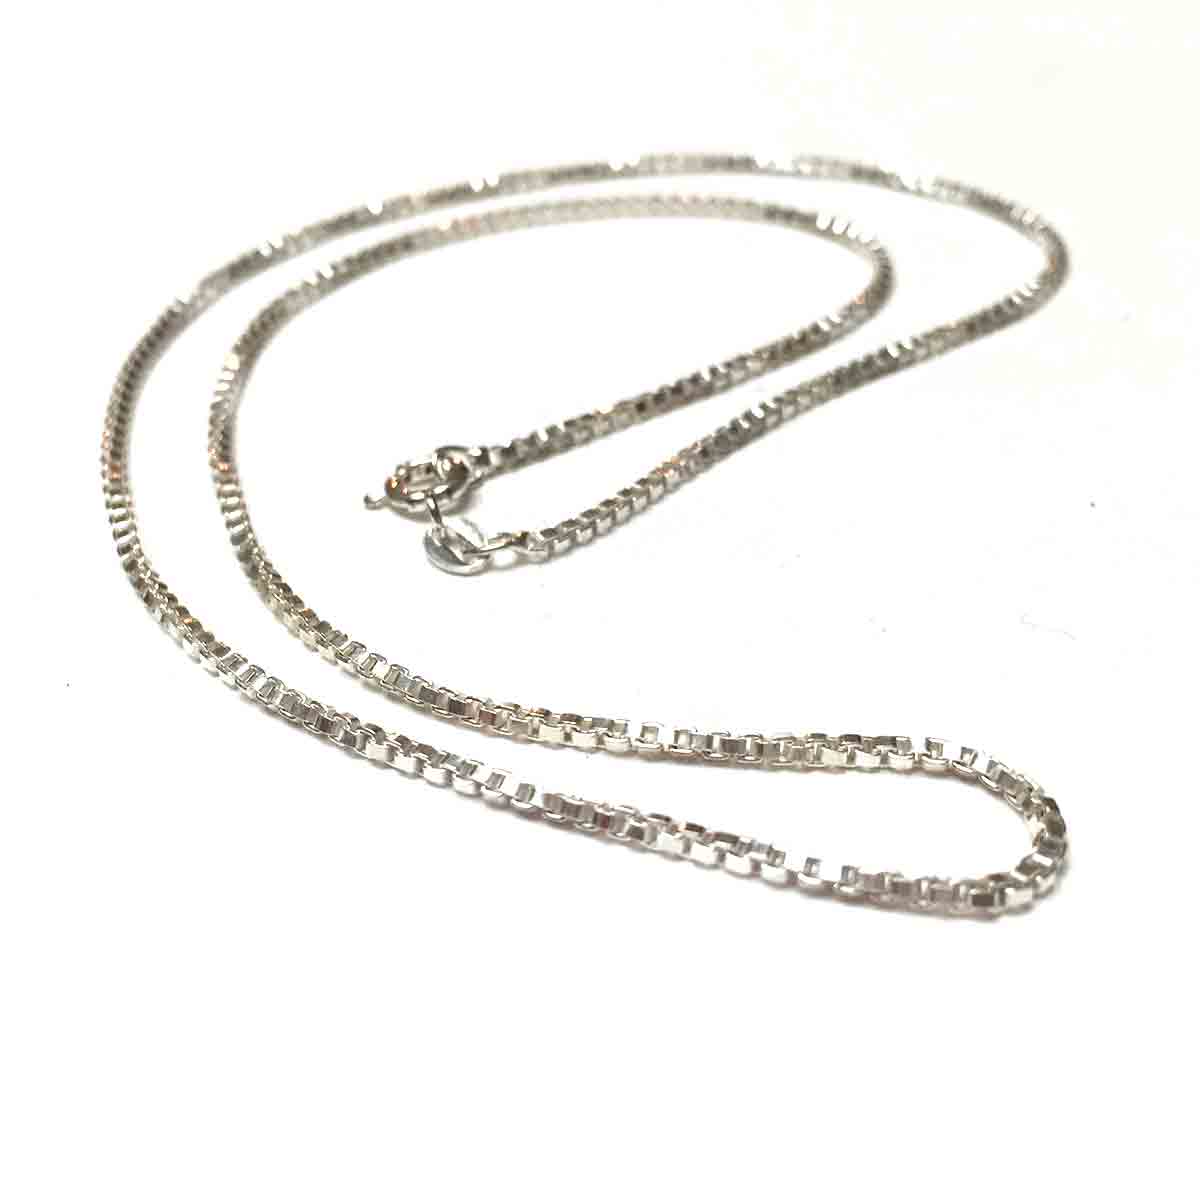 STERLING SILVER BOX CHAIN NECKLACE 1.5MM 20 INCHES